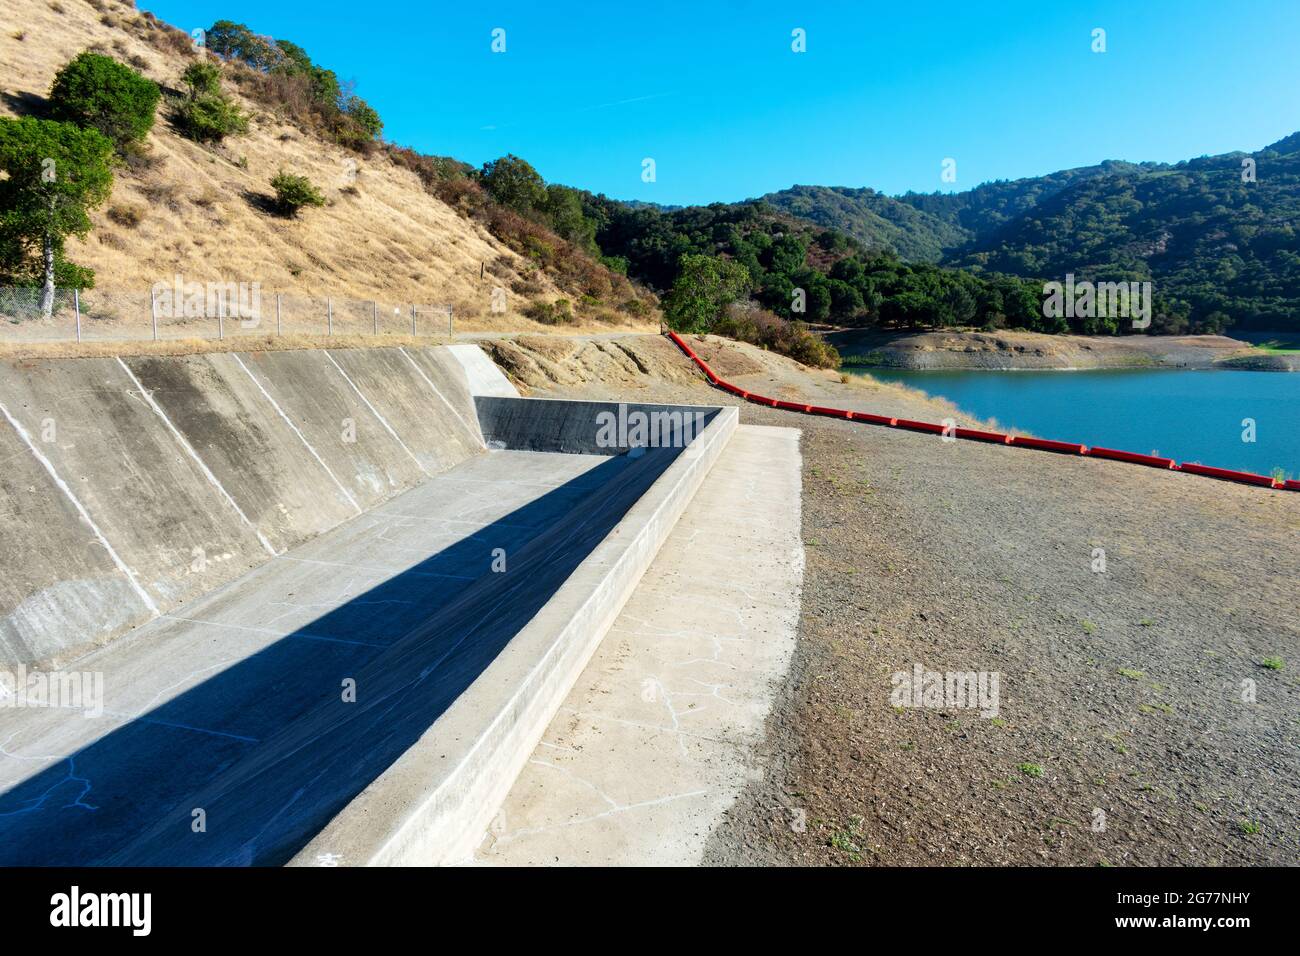 Concrete dam spillway, orange debris boom on dry ground. Extremely low water level in drying during summer Stevens Creek reservoir in San Francisco Ba Stock Photo